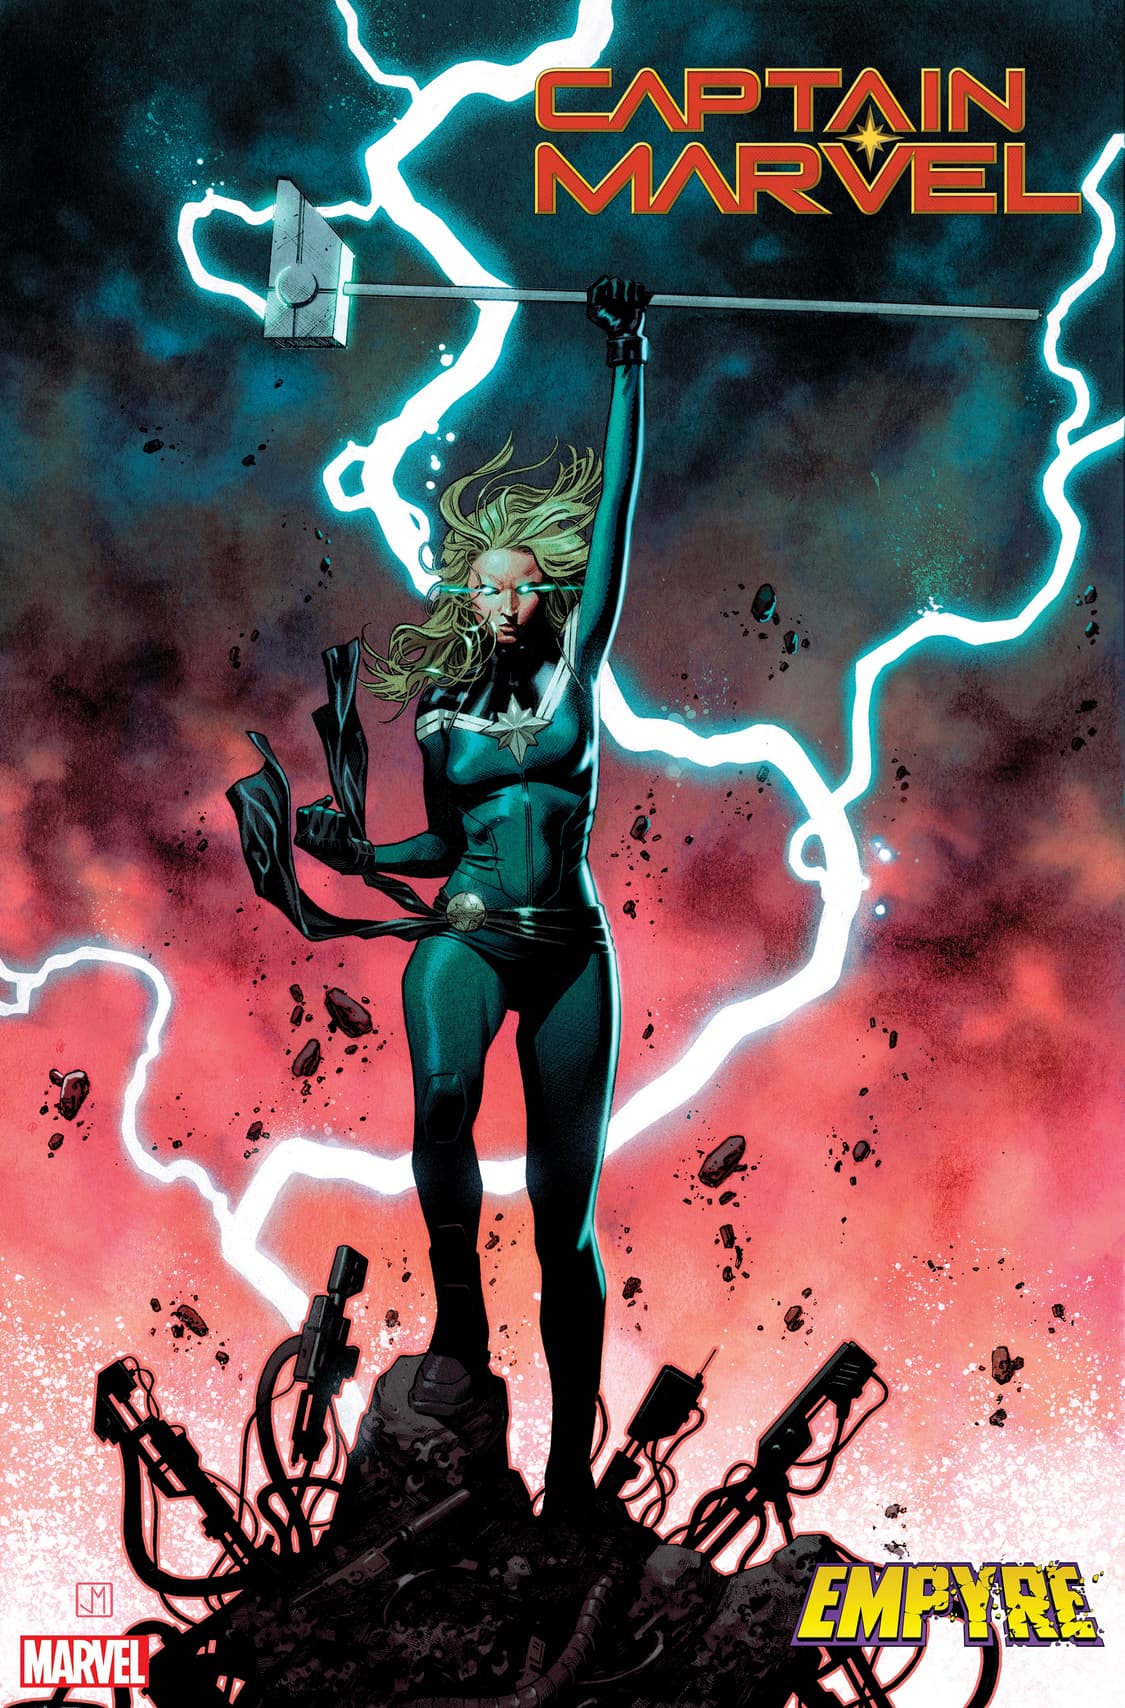 CAPTAIN MARVEL #18 Written by KELLY THOMPSON with art by CORY SMITH and coVER BY JORGE MOLINA